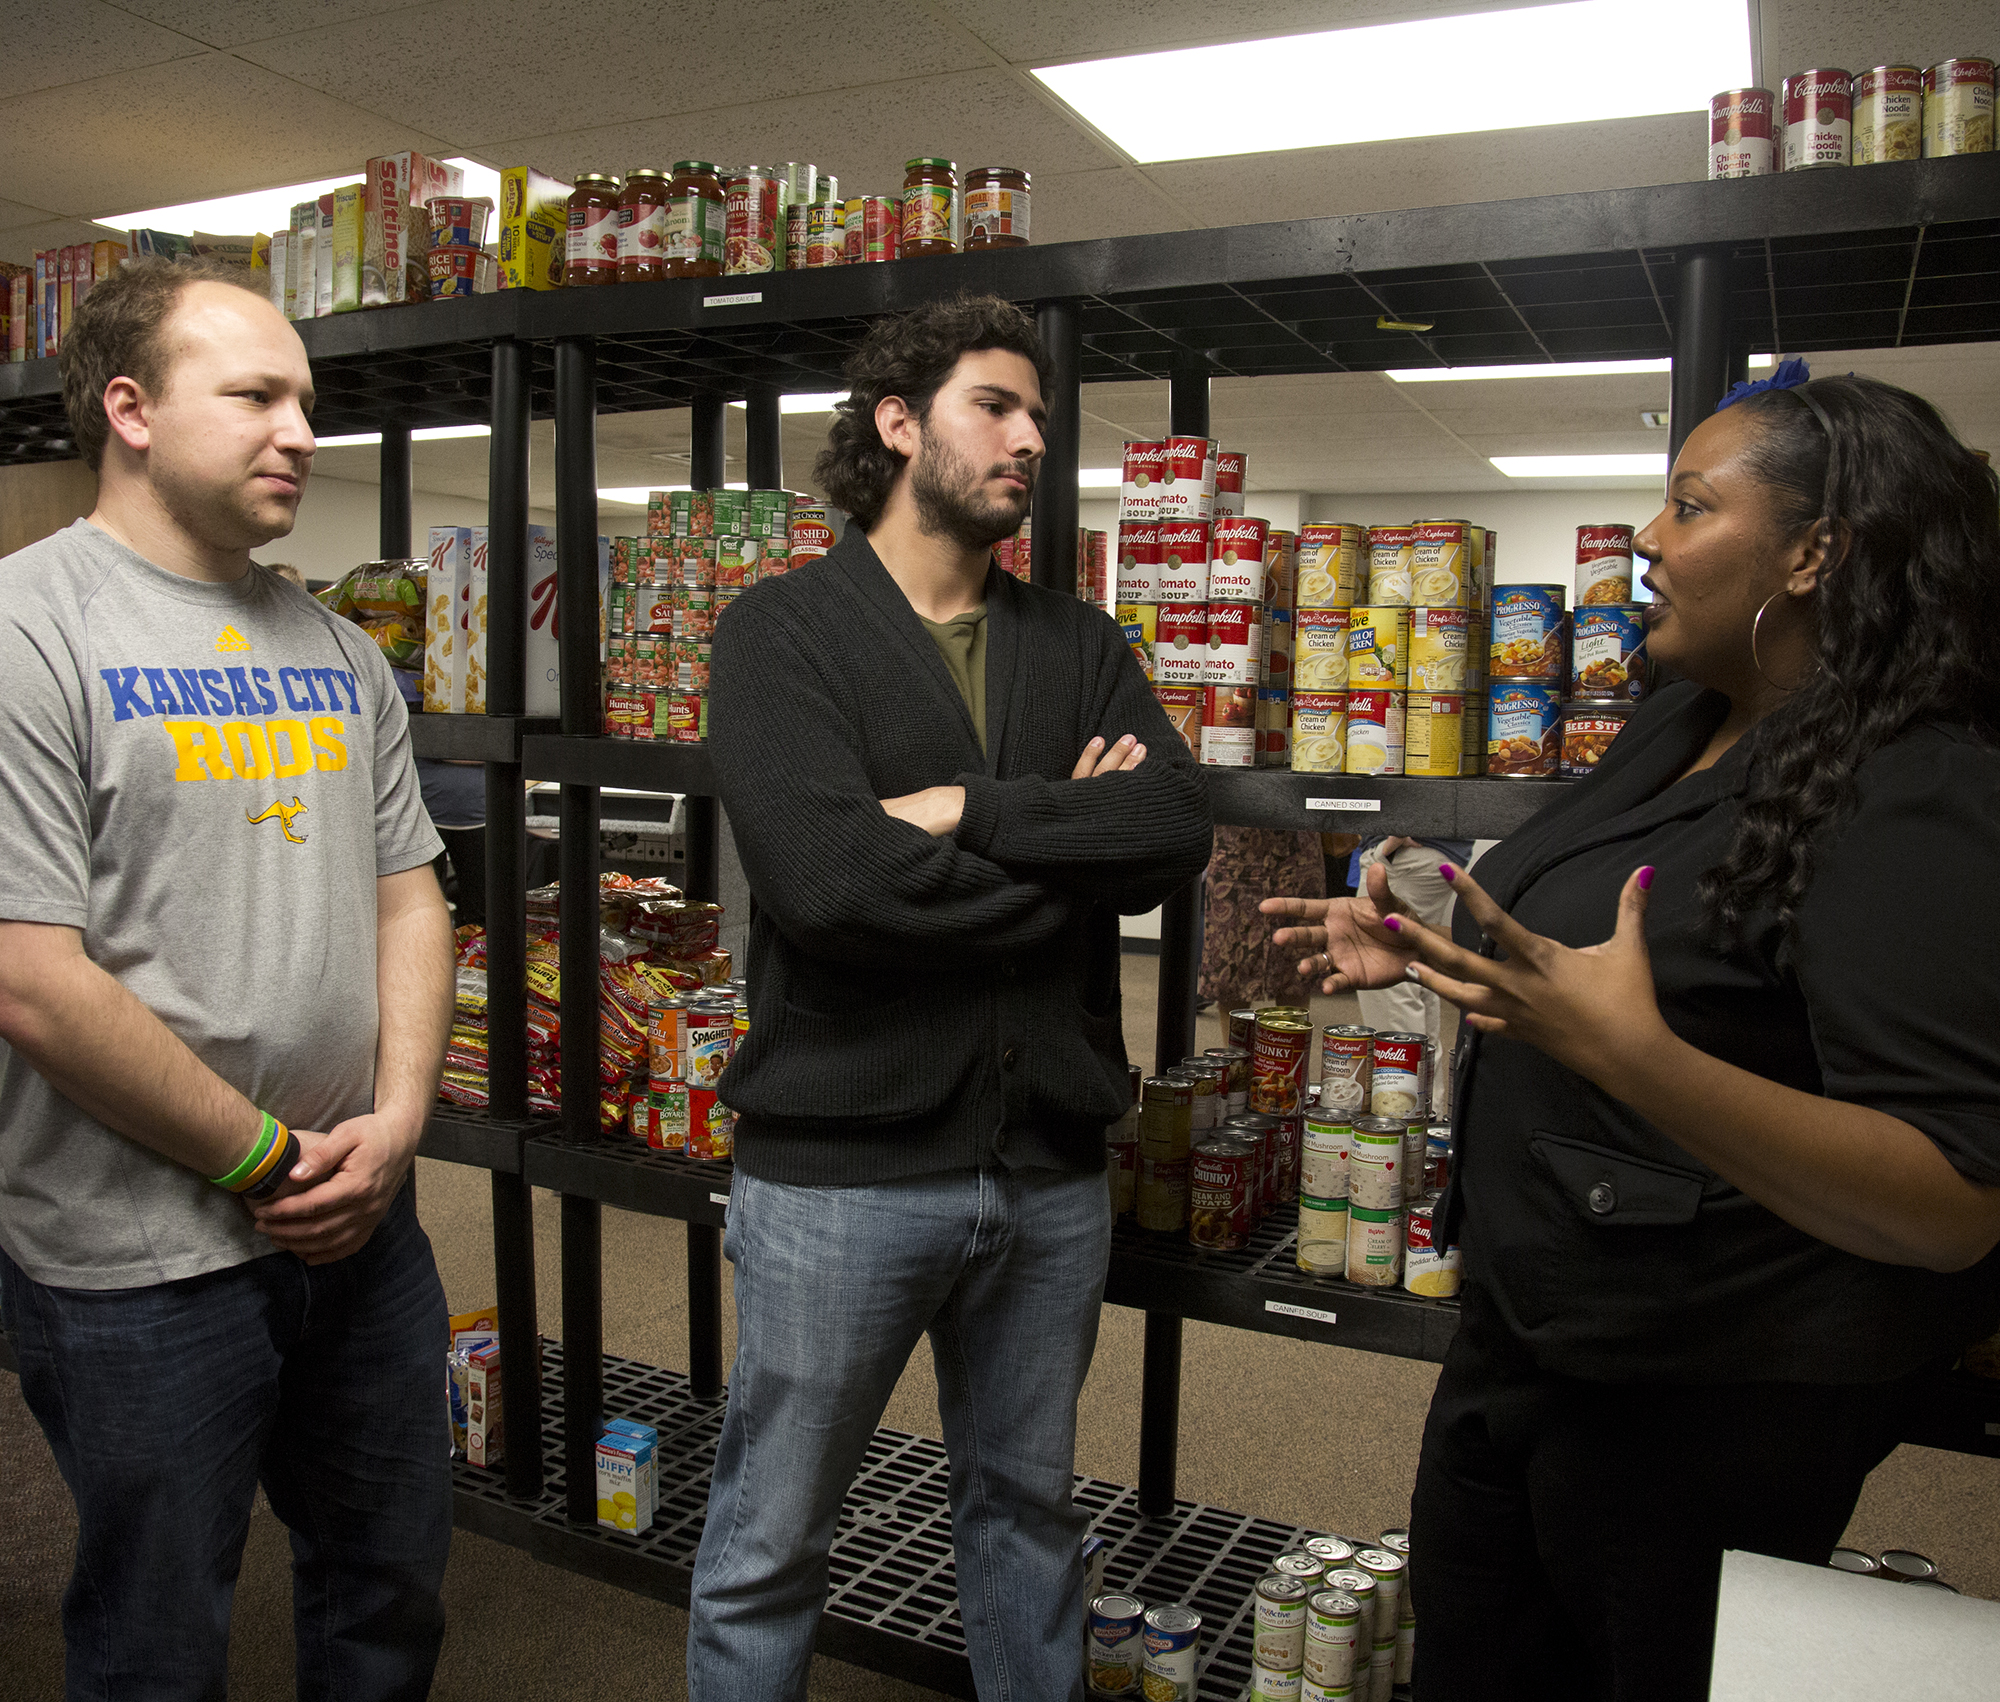 three people stand in front of shelves with canned goods at the Kangaroo Pantry